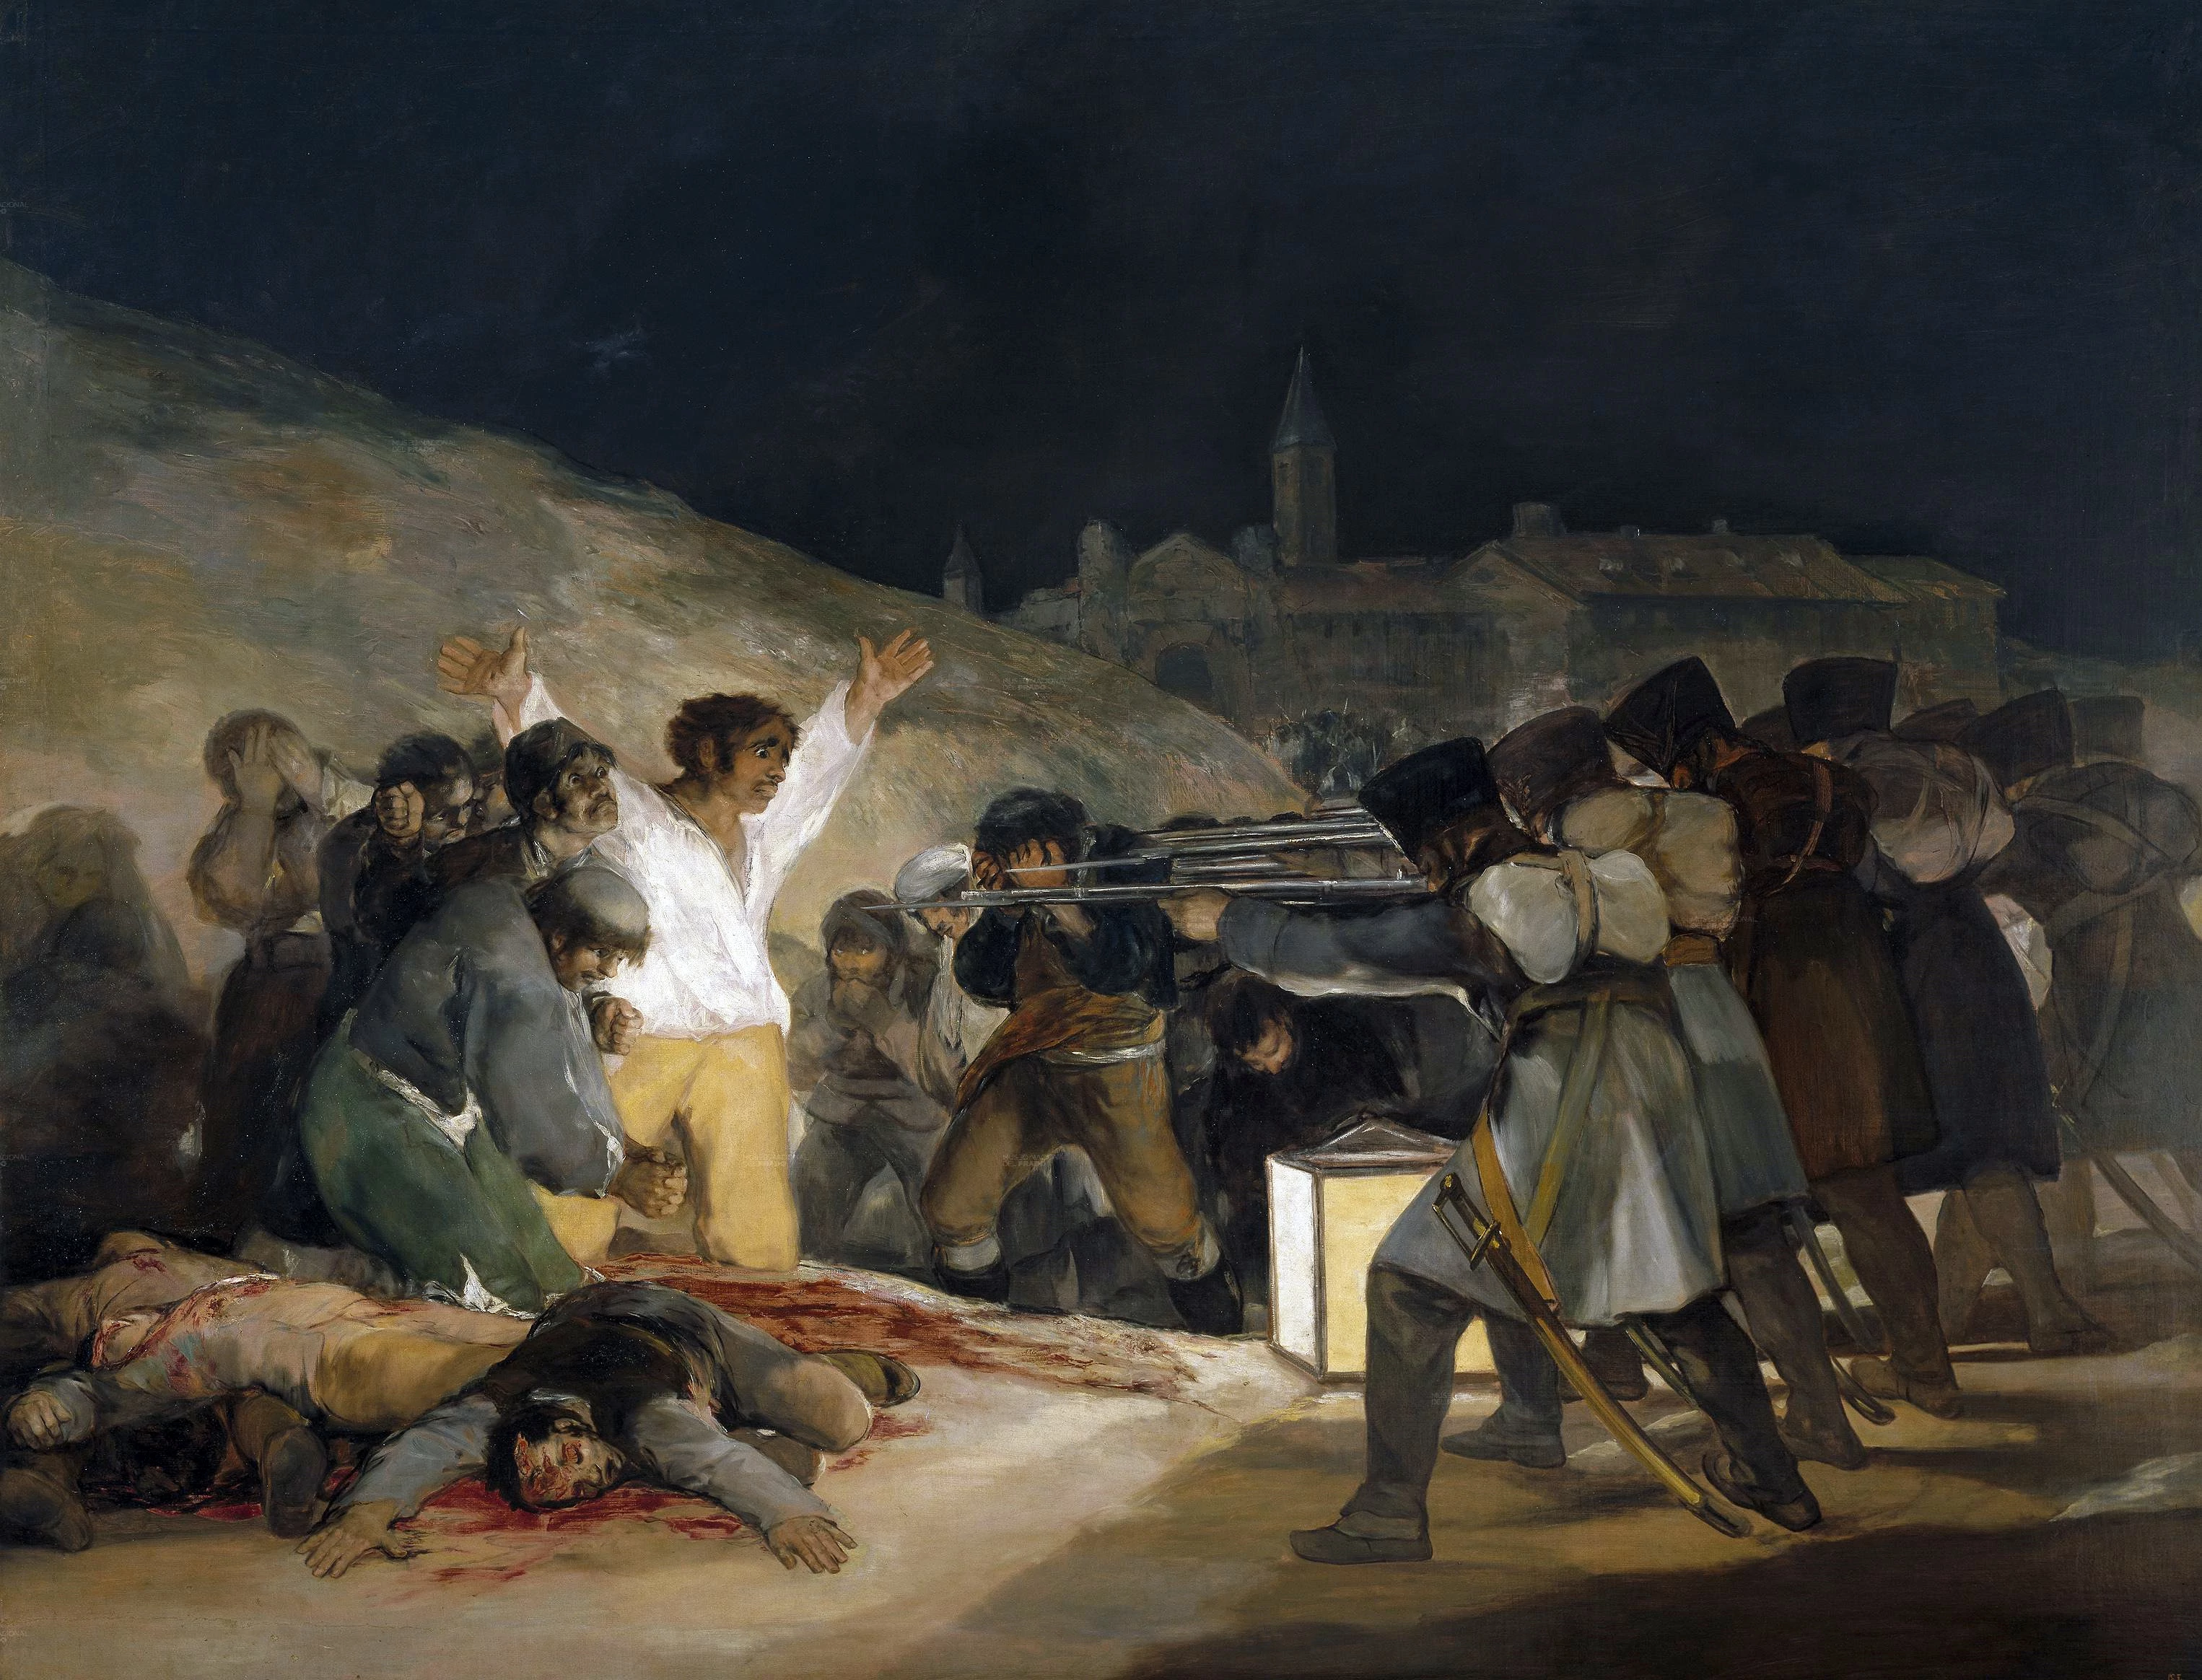 Executions on the Third of May, Francisco de Goya y Lucientes